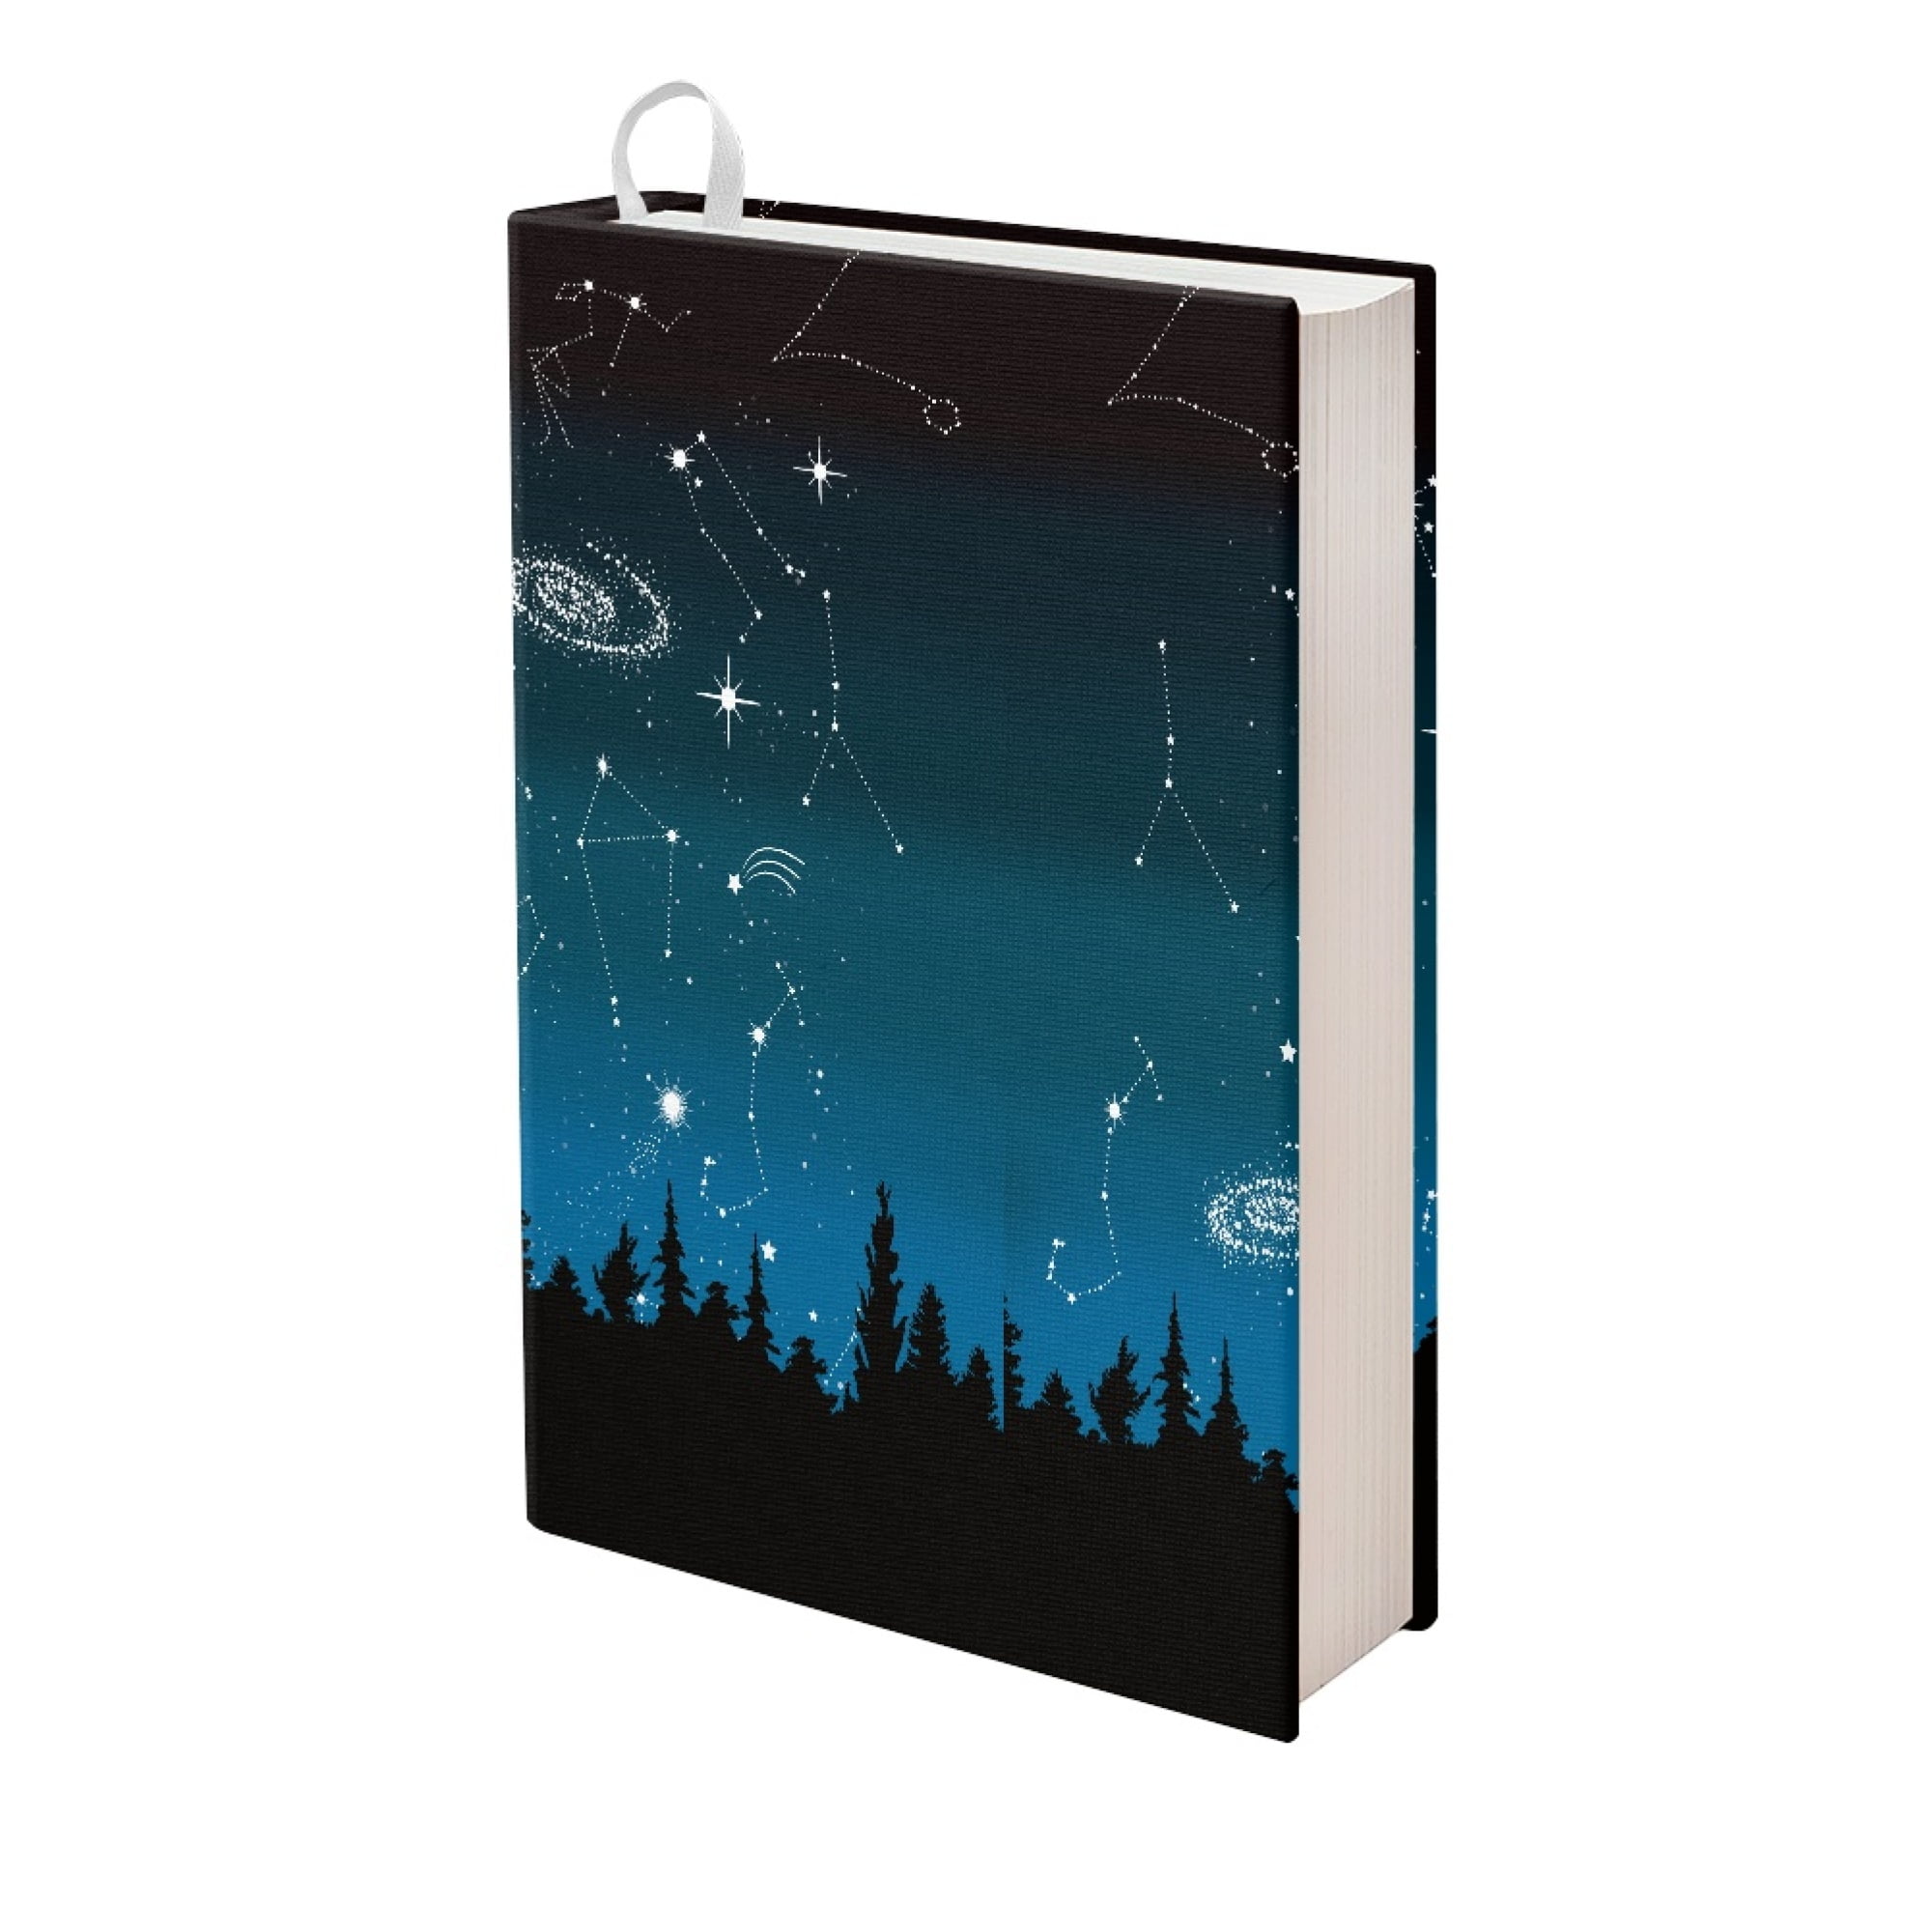 ZOCAVIA Starry Sky Bling Book Sleeve Cover Reusable Protective Cover for  School Books Jumbo Stretchable Book Cover 3 Pack 